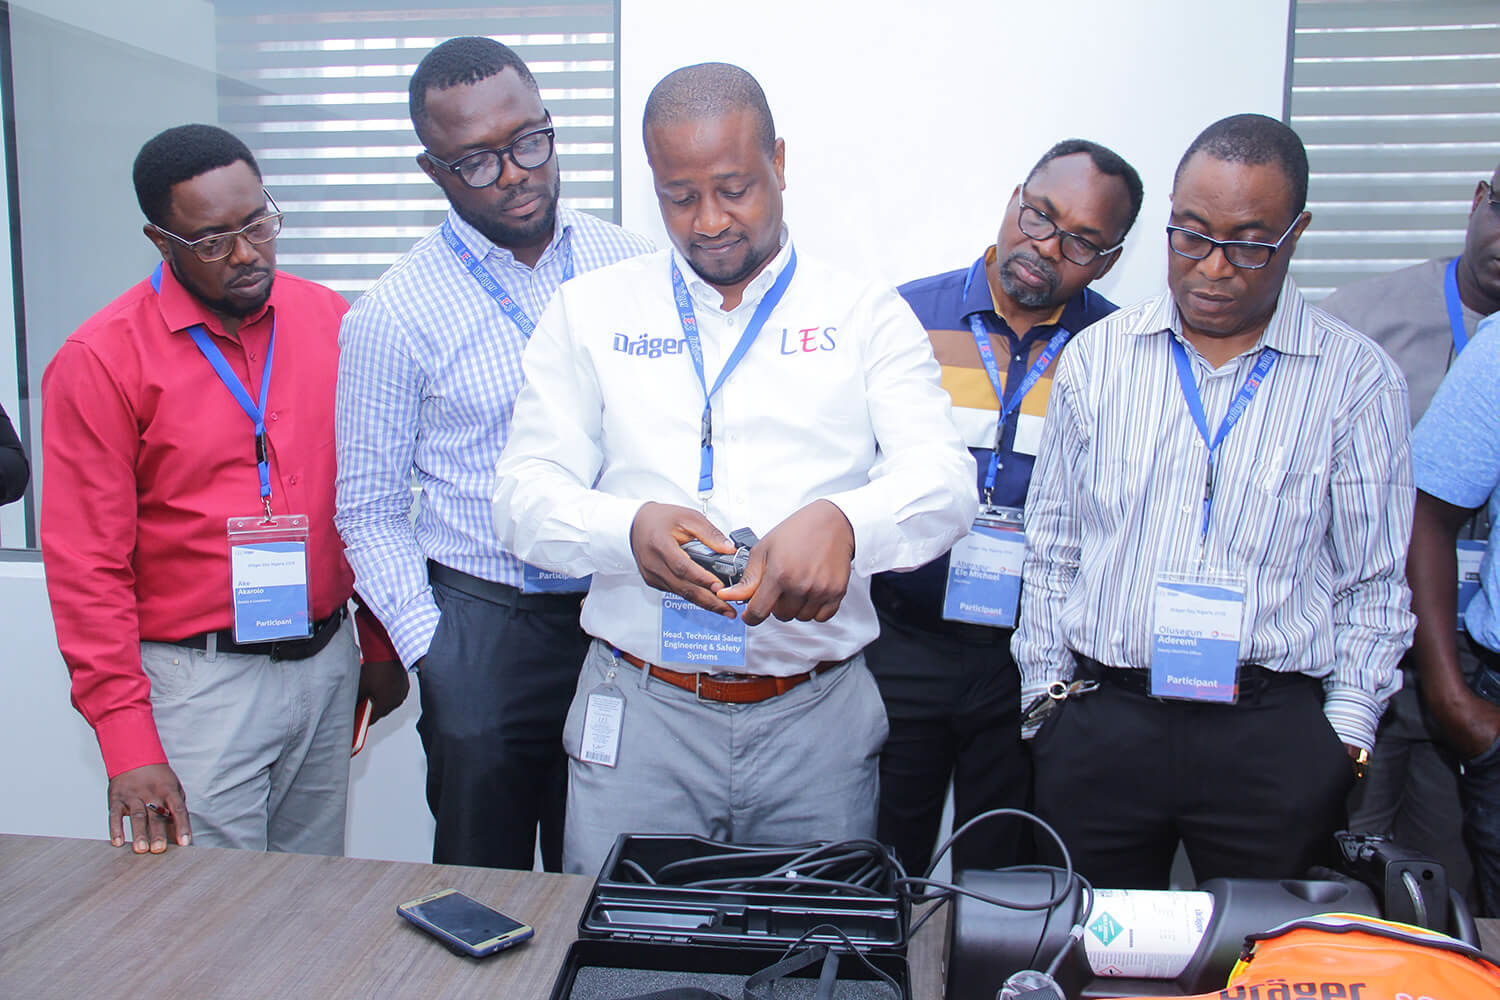 LES Energy Head Technical Sales and Engineering – Safety Systems, Amanze Onyemaechi Demonstrating Portable Gas Detectors to the Participants